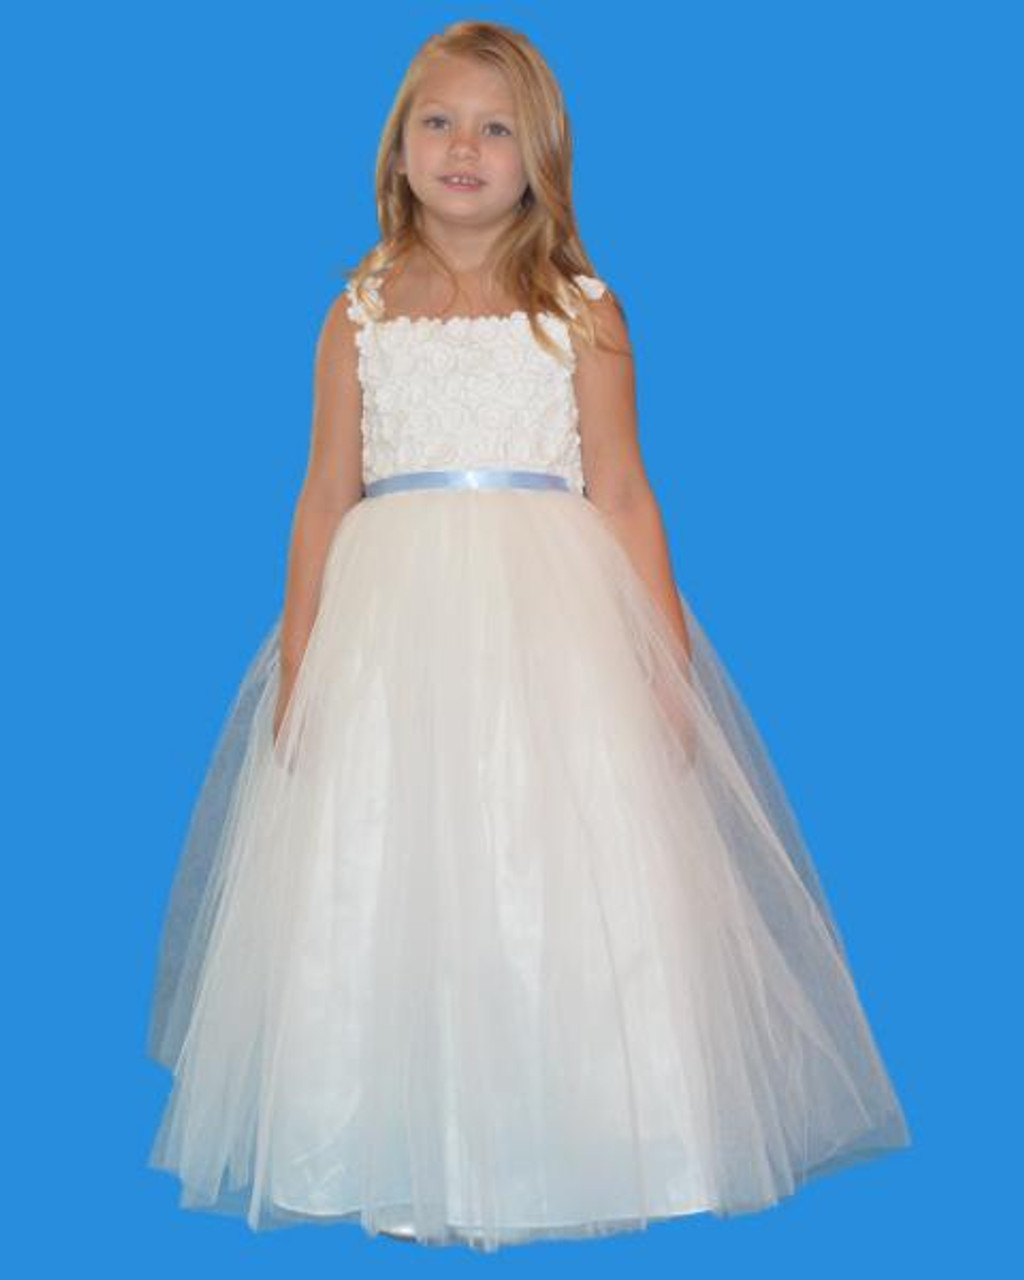 Rosebud Fashions Flower Girl Dresses - Style 5131 - Satin,  Lace, and Tulle